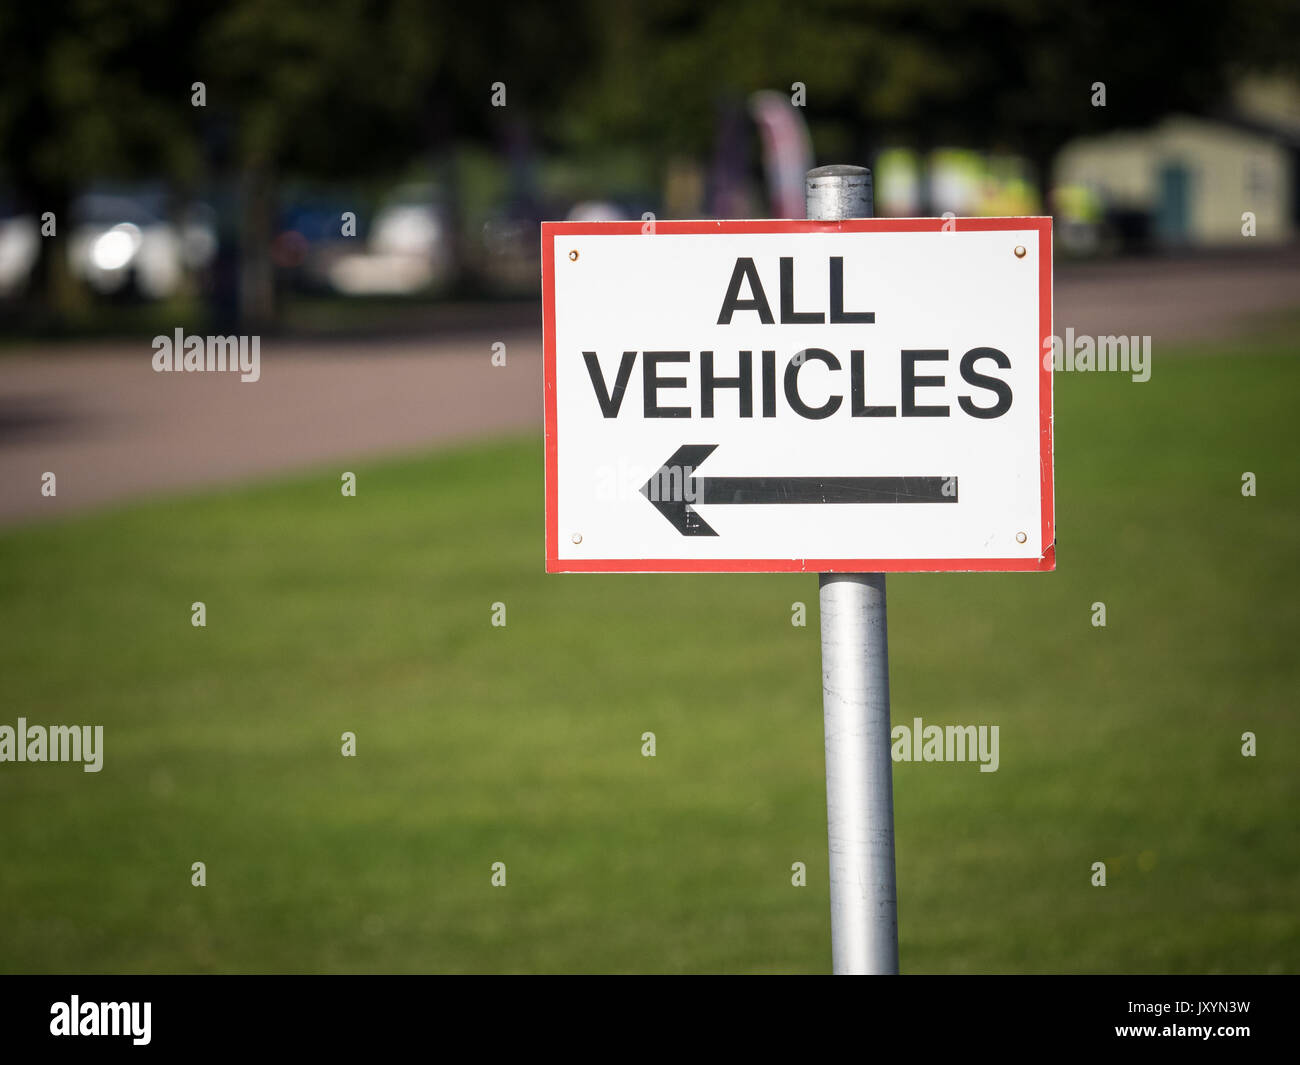 All Vehicles Direction Sign Arrow Stock Photo